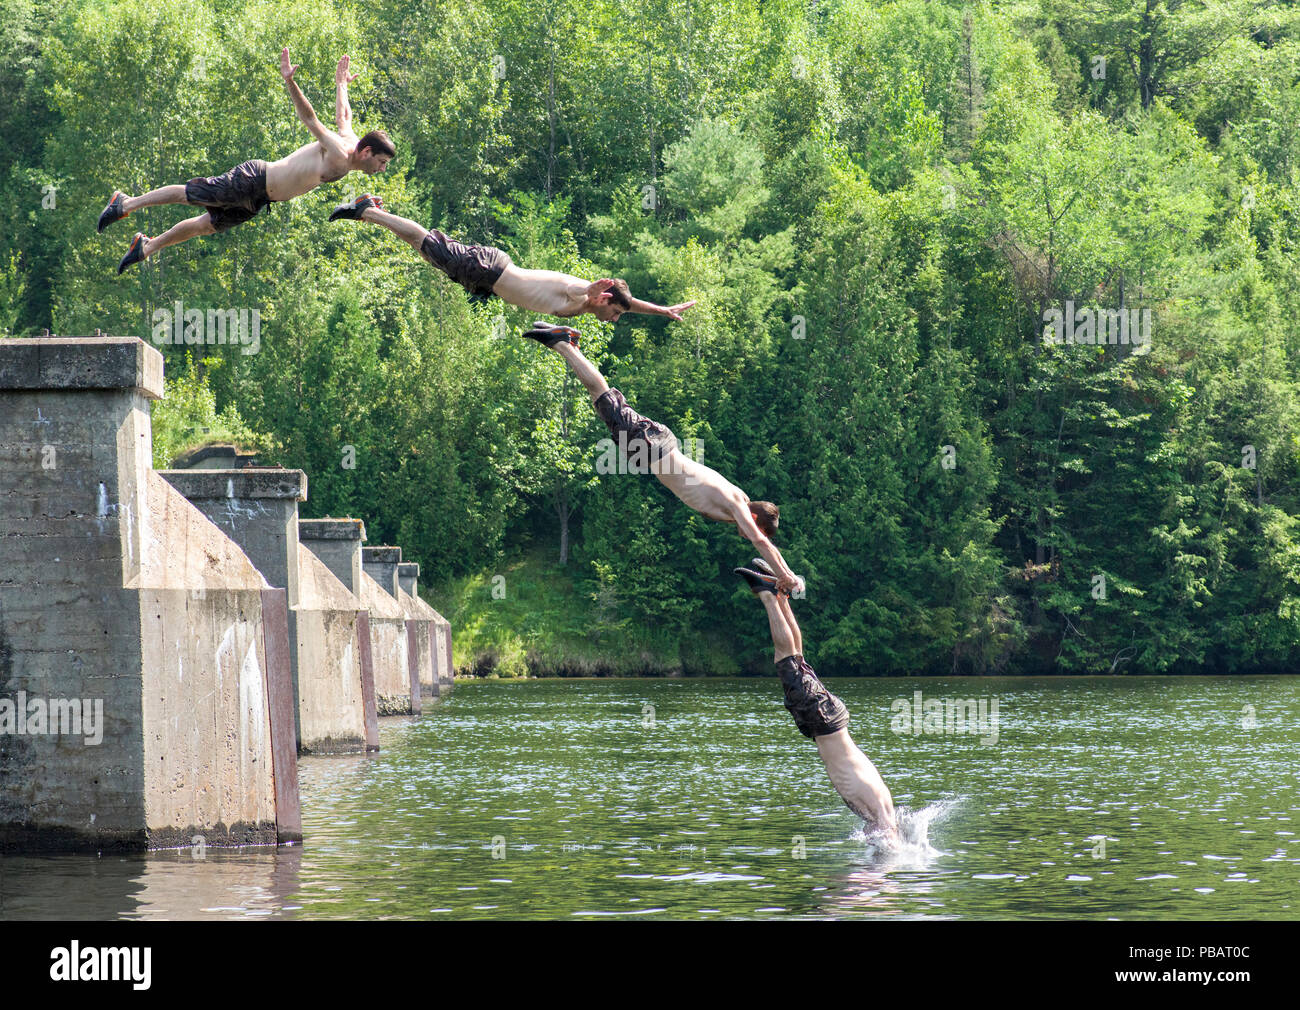 A sequence of frames showing a dive off an old bridge pier into the Madawaska River near Ottawa, Ontario. Stock Photo